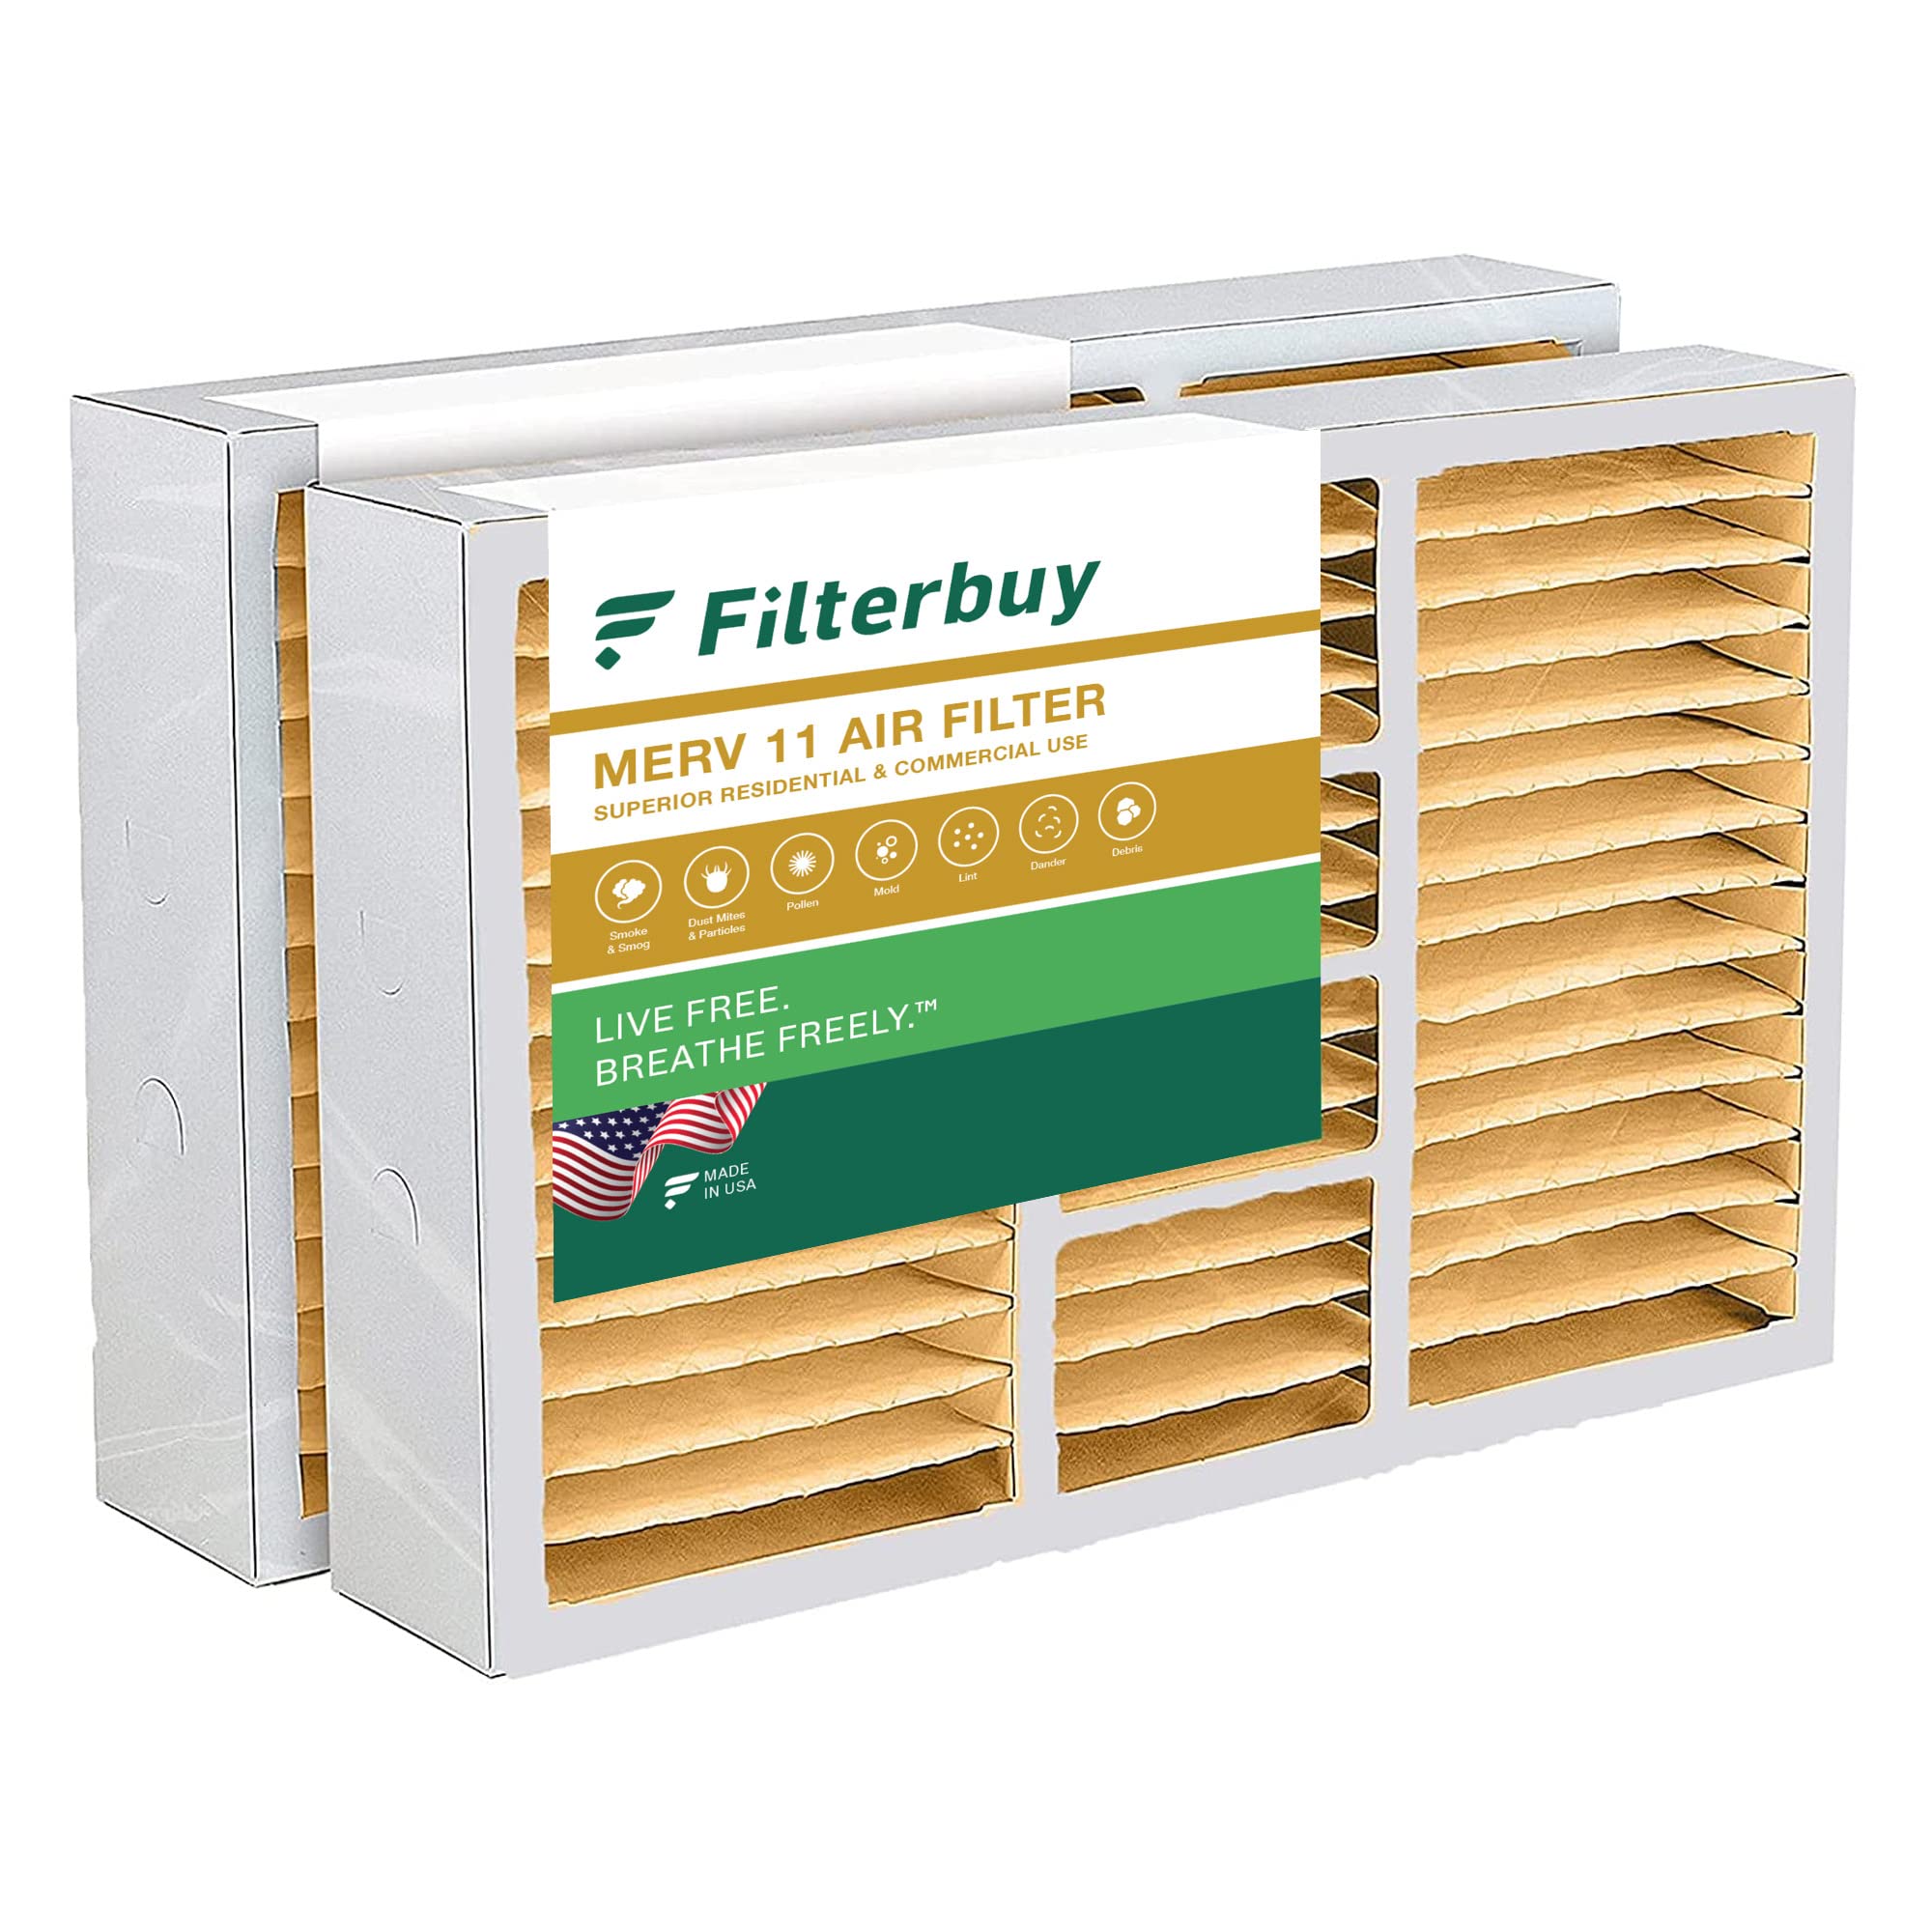 Filterbuy 14.5X27X5 Air Filter Merv 11 Allergen Defense (2-Pack), Pleated Hvac Ac Furnace Air Filters Replacement For Trane, Ame